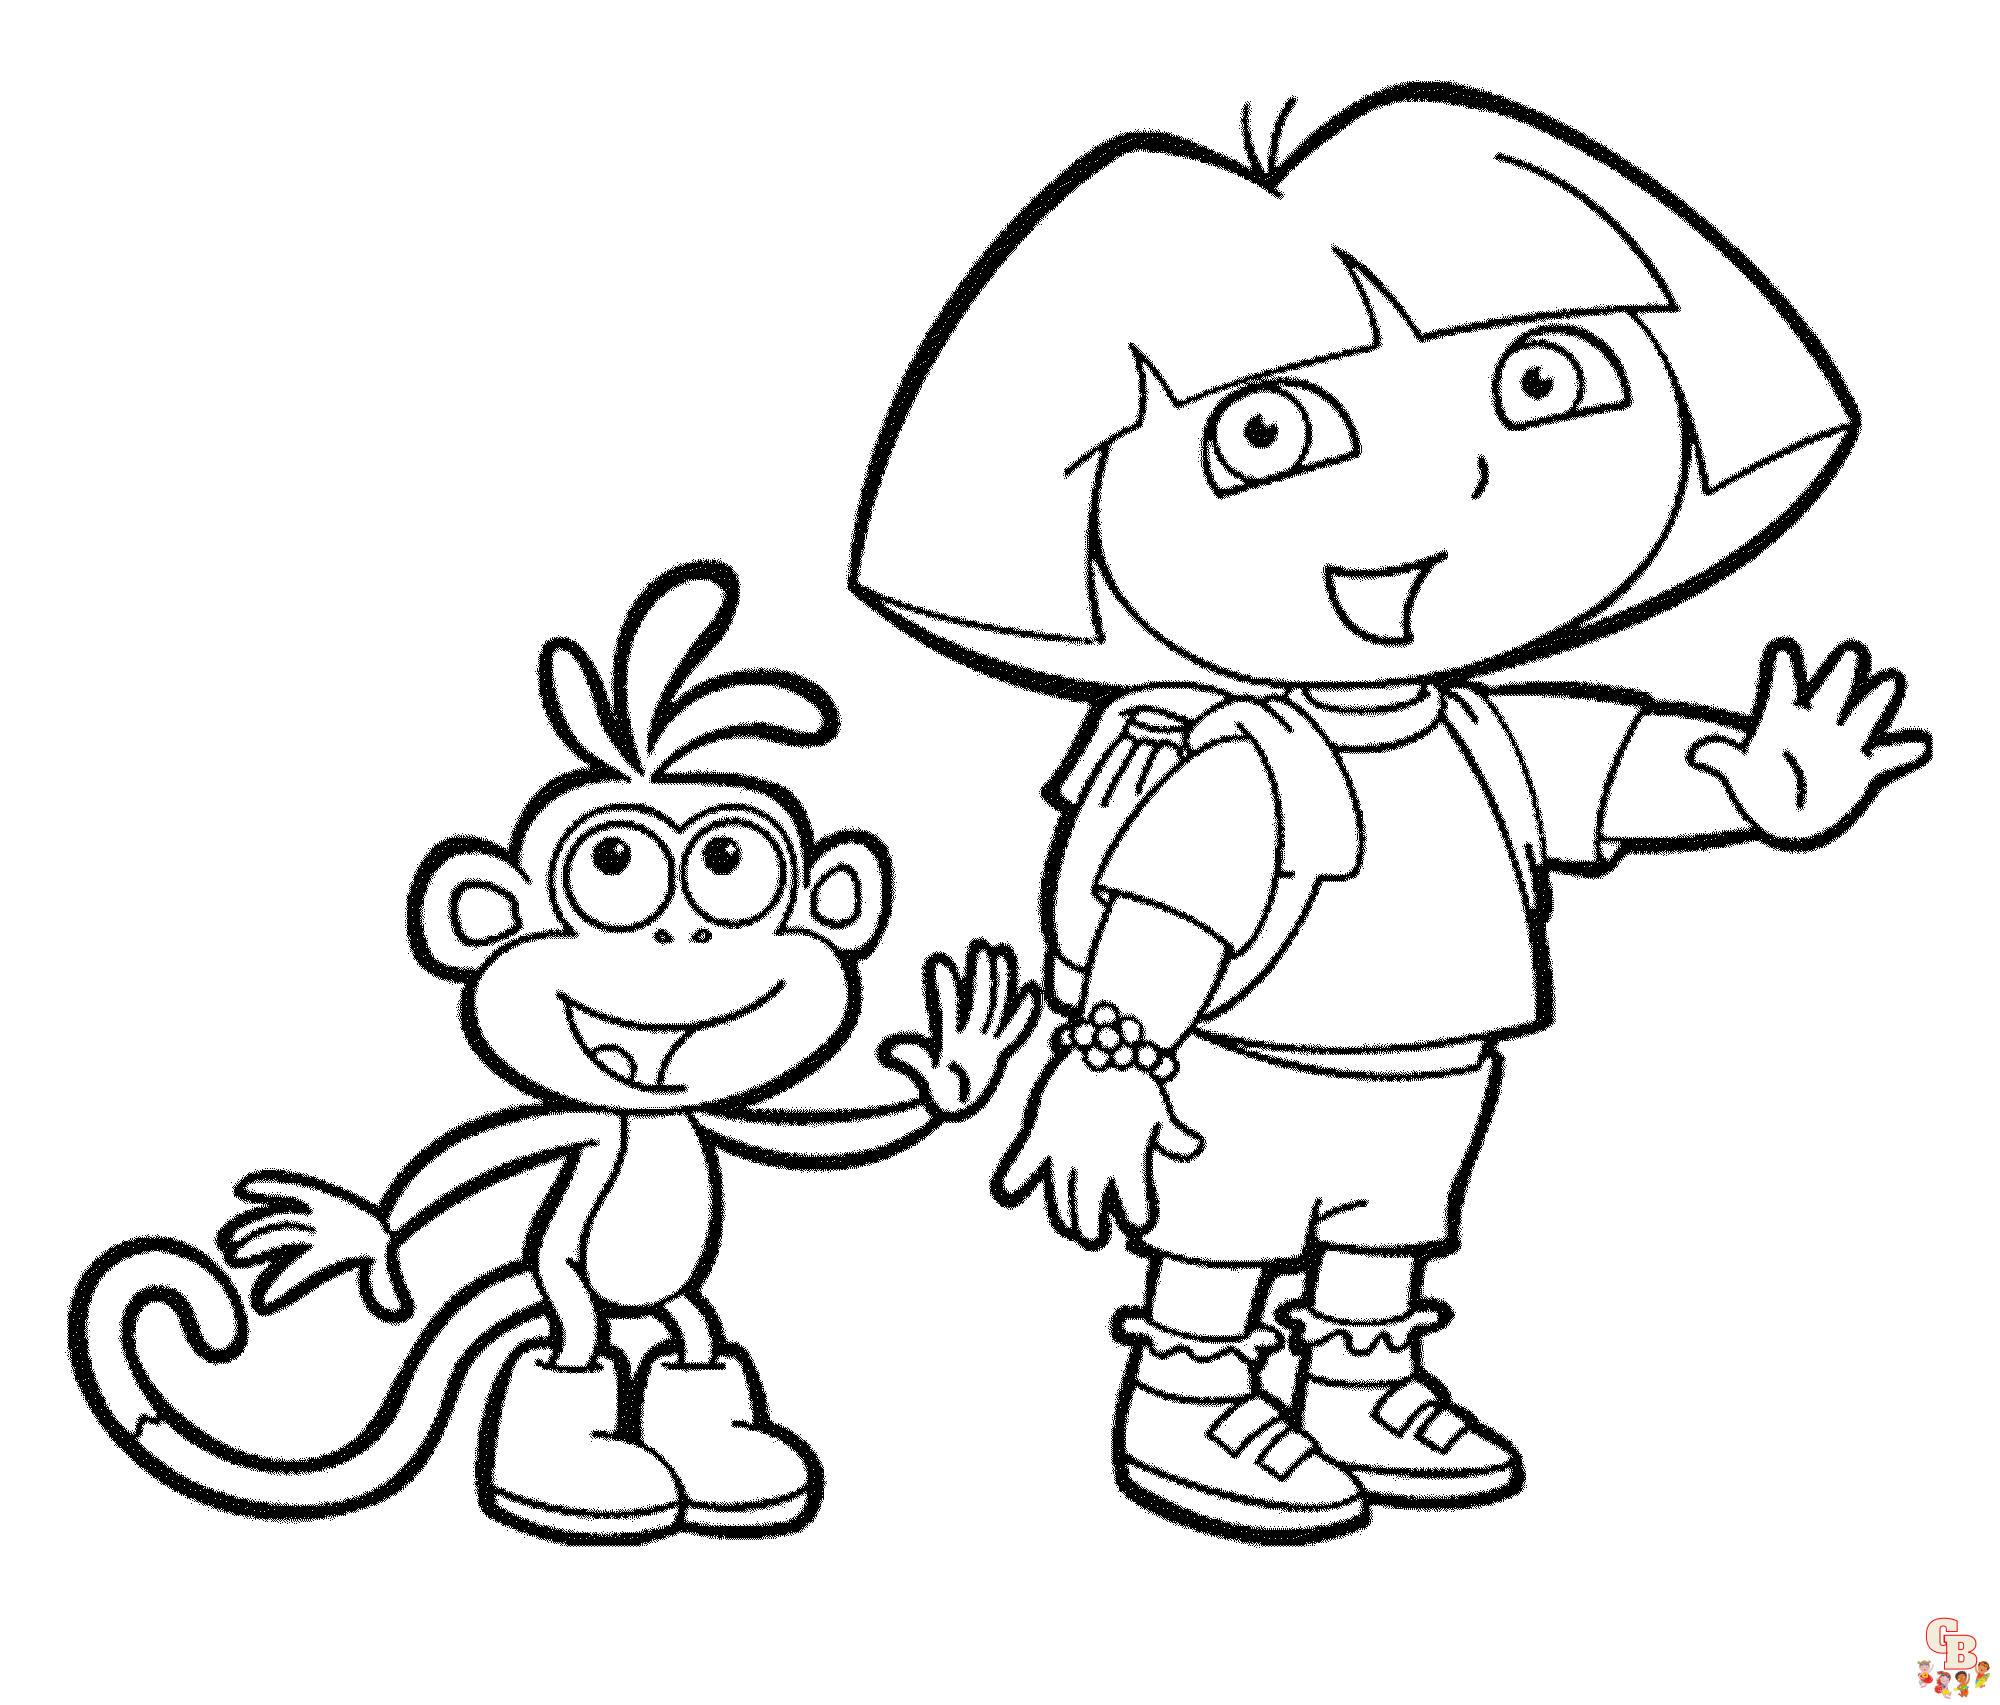 Fun and engaging dora coloring pages for kids